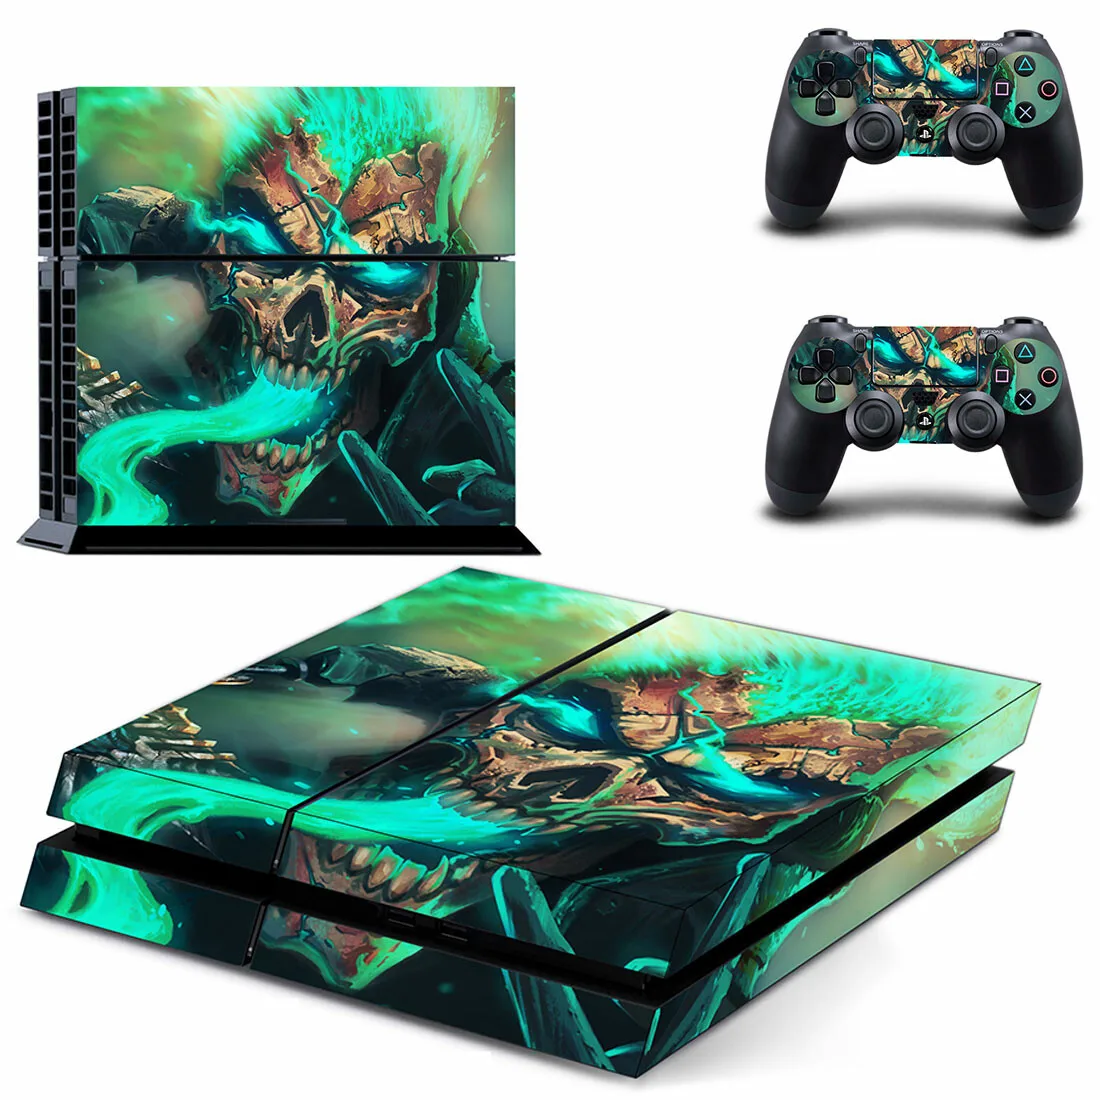 Green Skull PS4 Stickers Play station 4 Skin Sticker Decals For PlayStation 4 PS4 Console & Controller Skins Vinyl